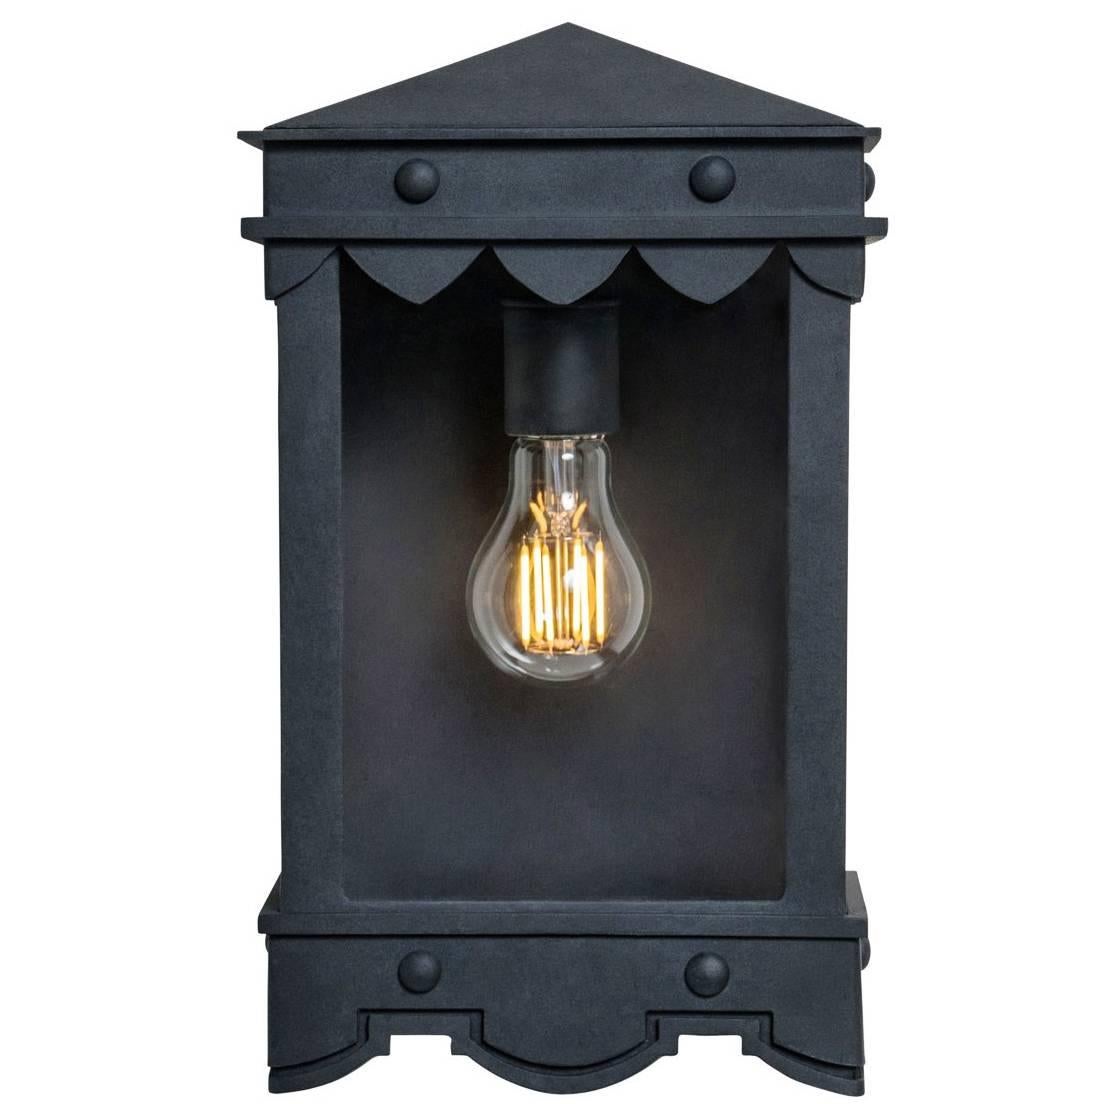 This lantern has Mediterranean style precedence with historic profiles and contemporized geometric lines. A striking fixture during the day but even more so at night when the patterned hem casts intricate shadows.

Lantern shown in SBLC Grey Finish